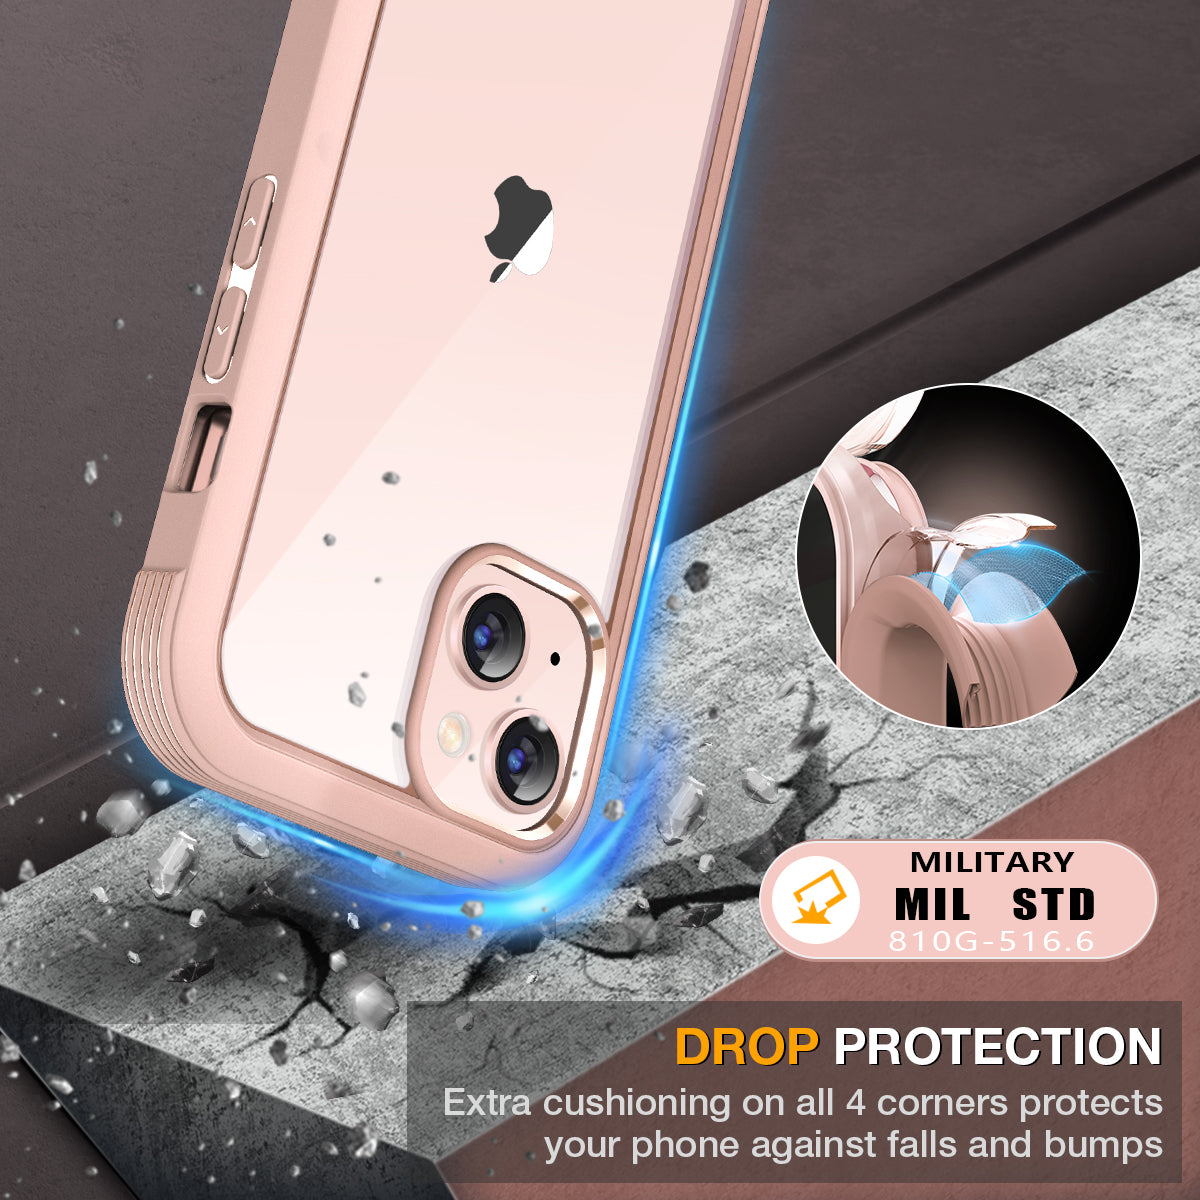 Phone Case with Glass Screen Protector for iPhone 13 Mini-Pink